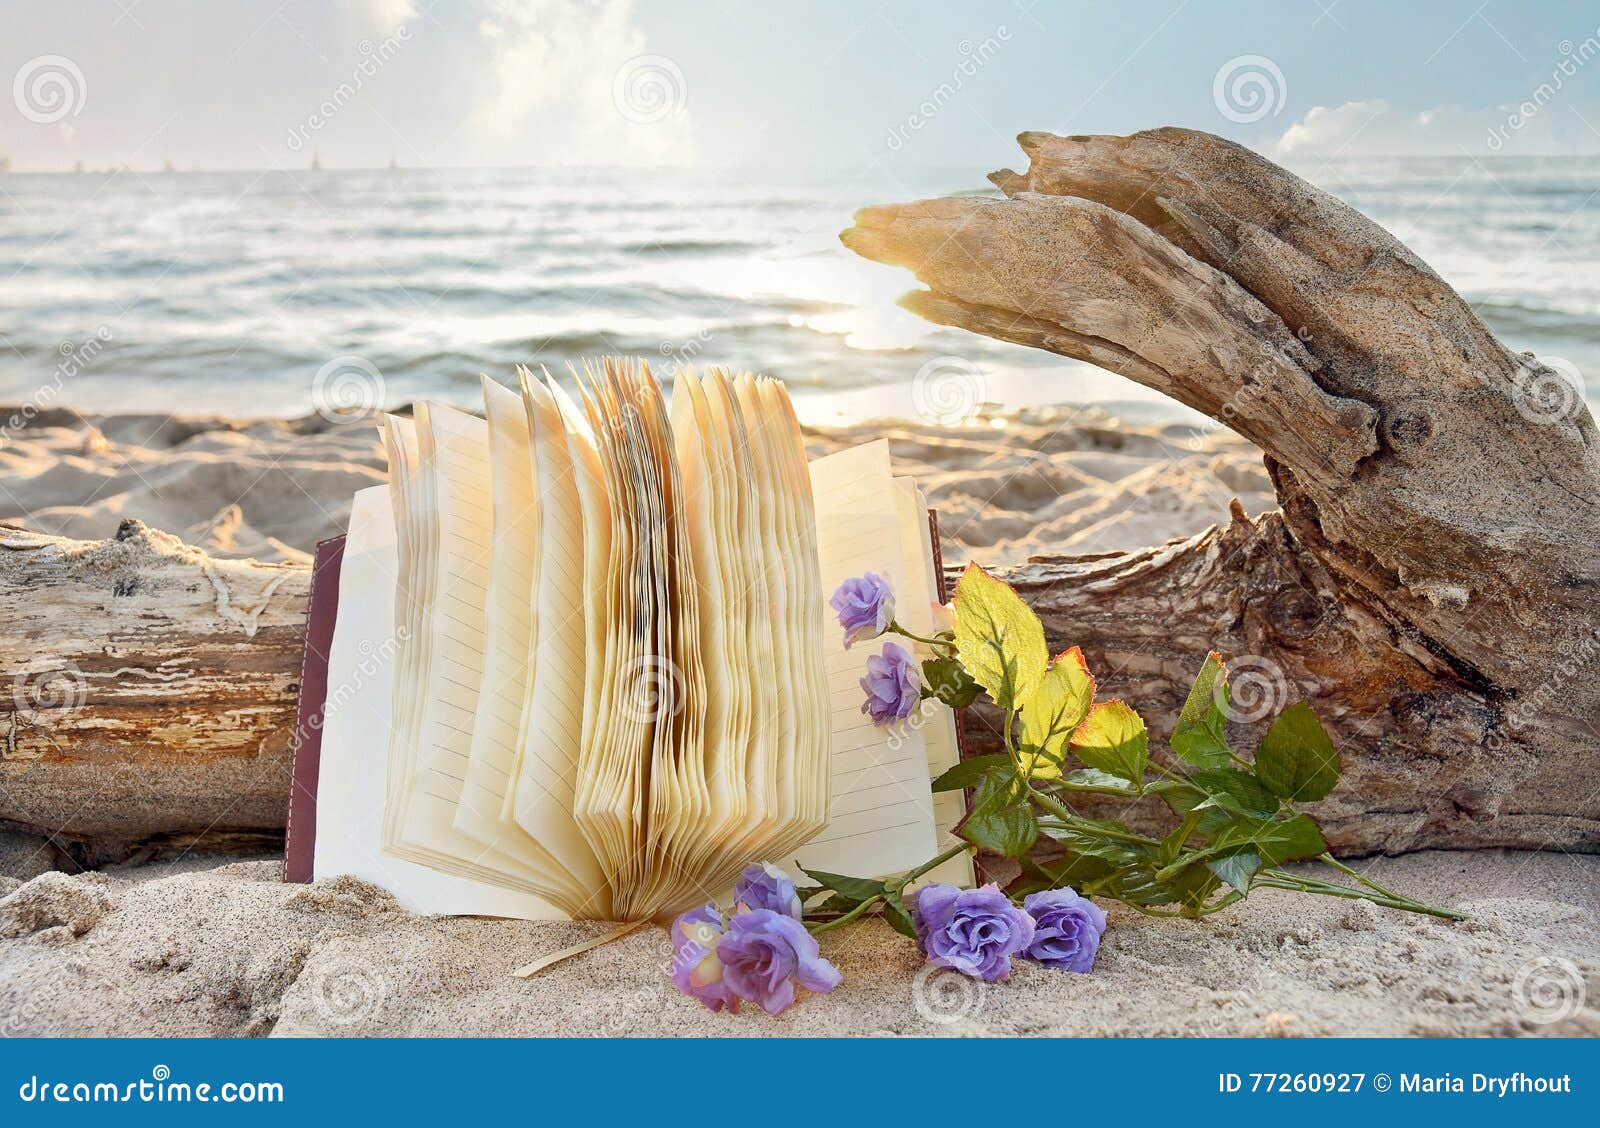 journal and roses in beach sand